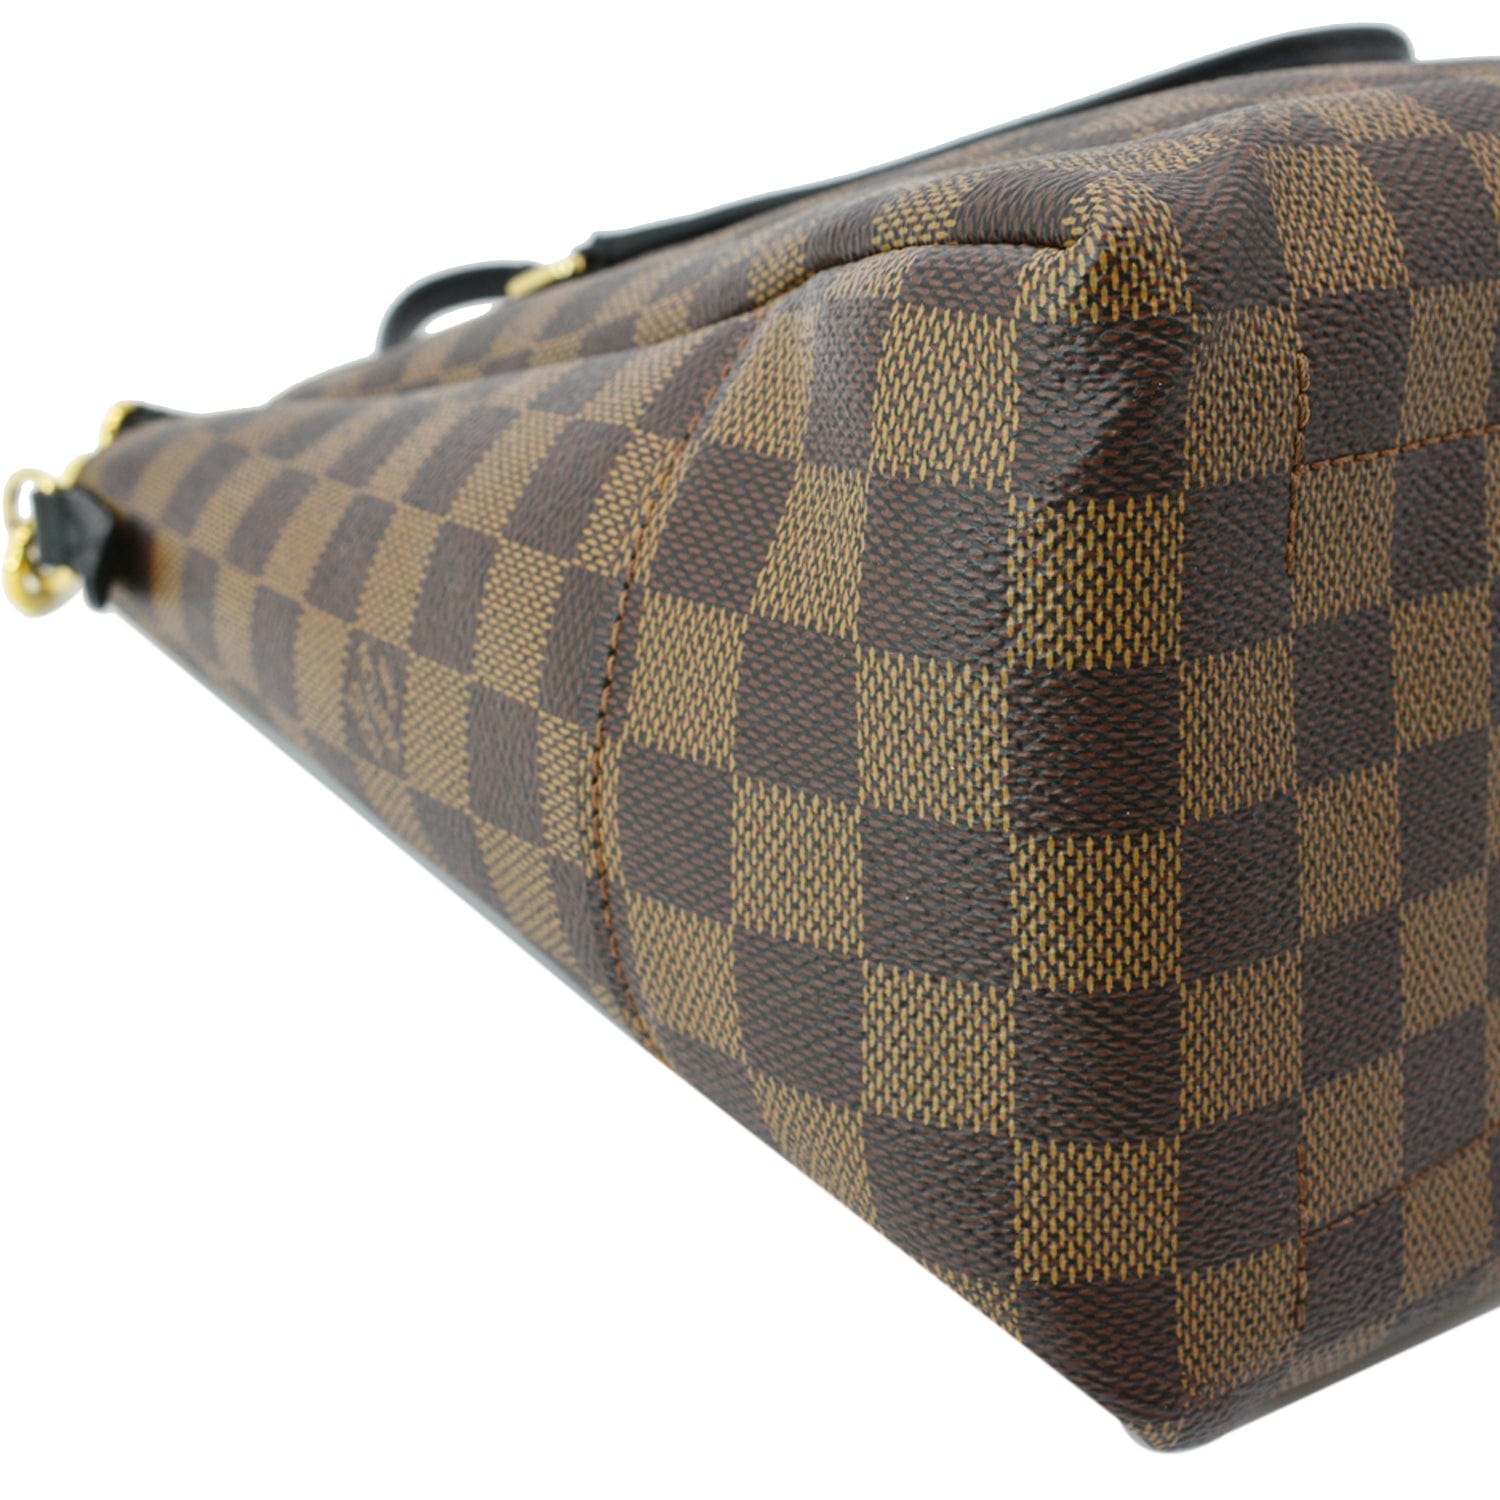 Authentic Louis Vuitton “duomo” in damier ebene! immaculate shape!